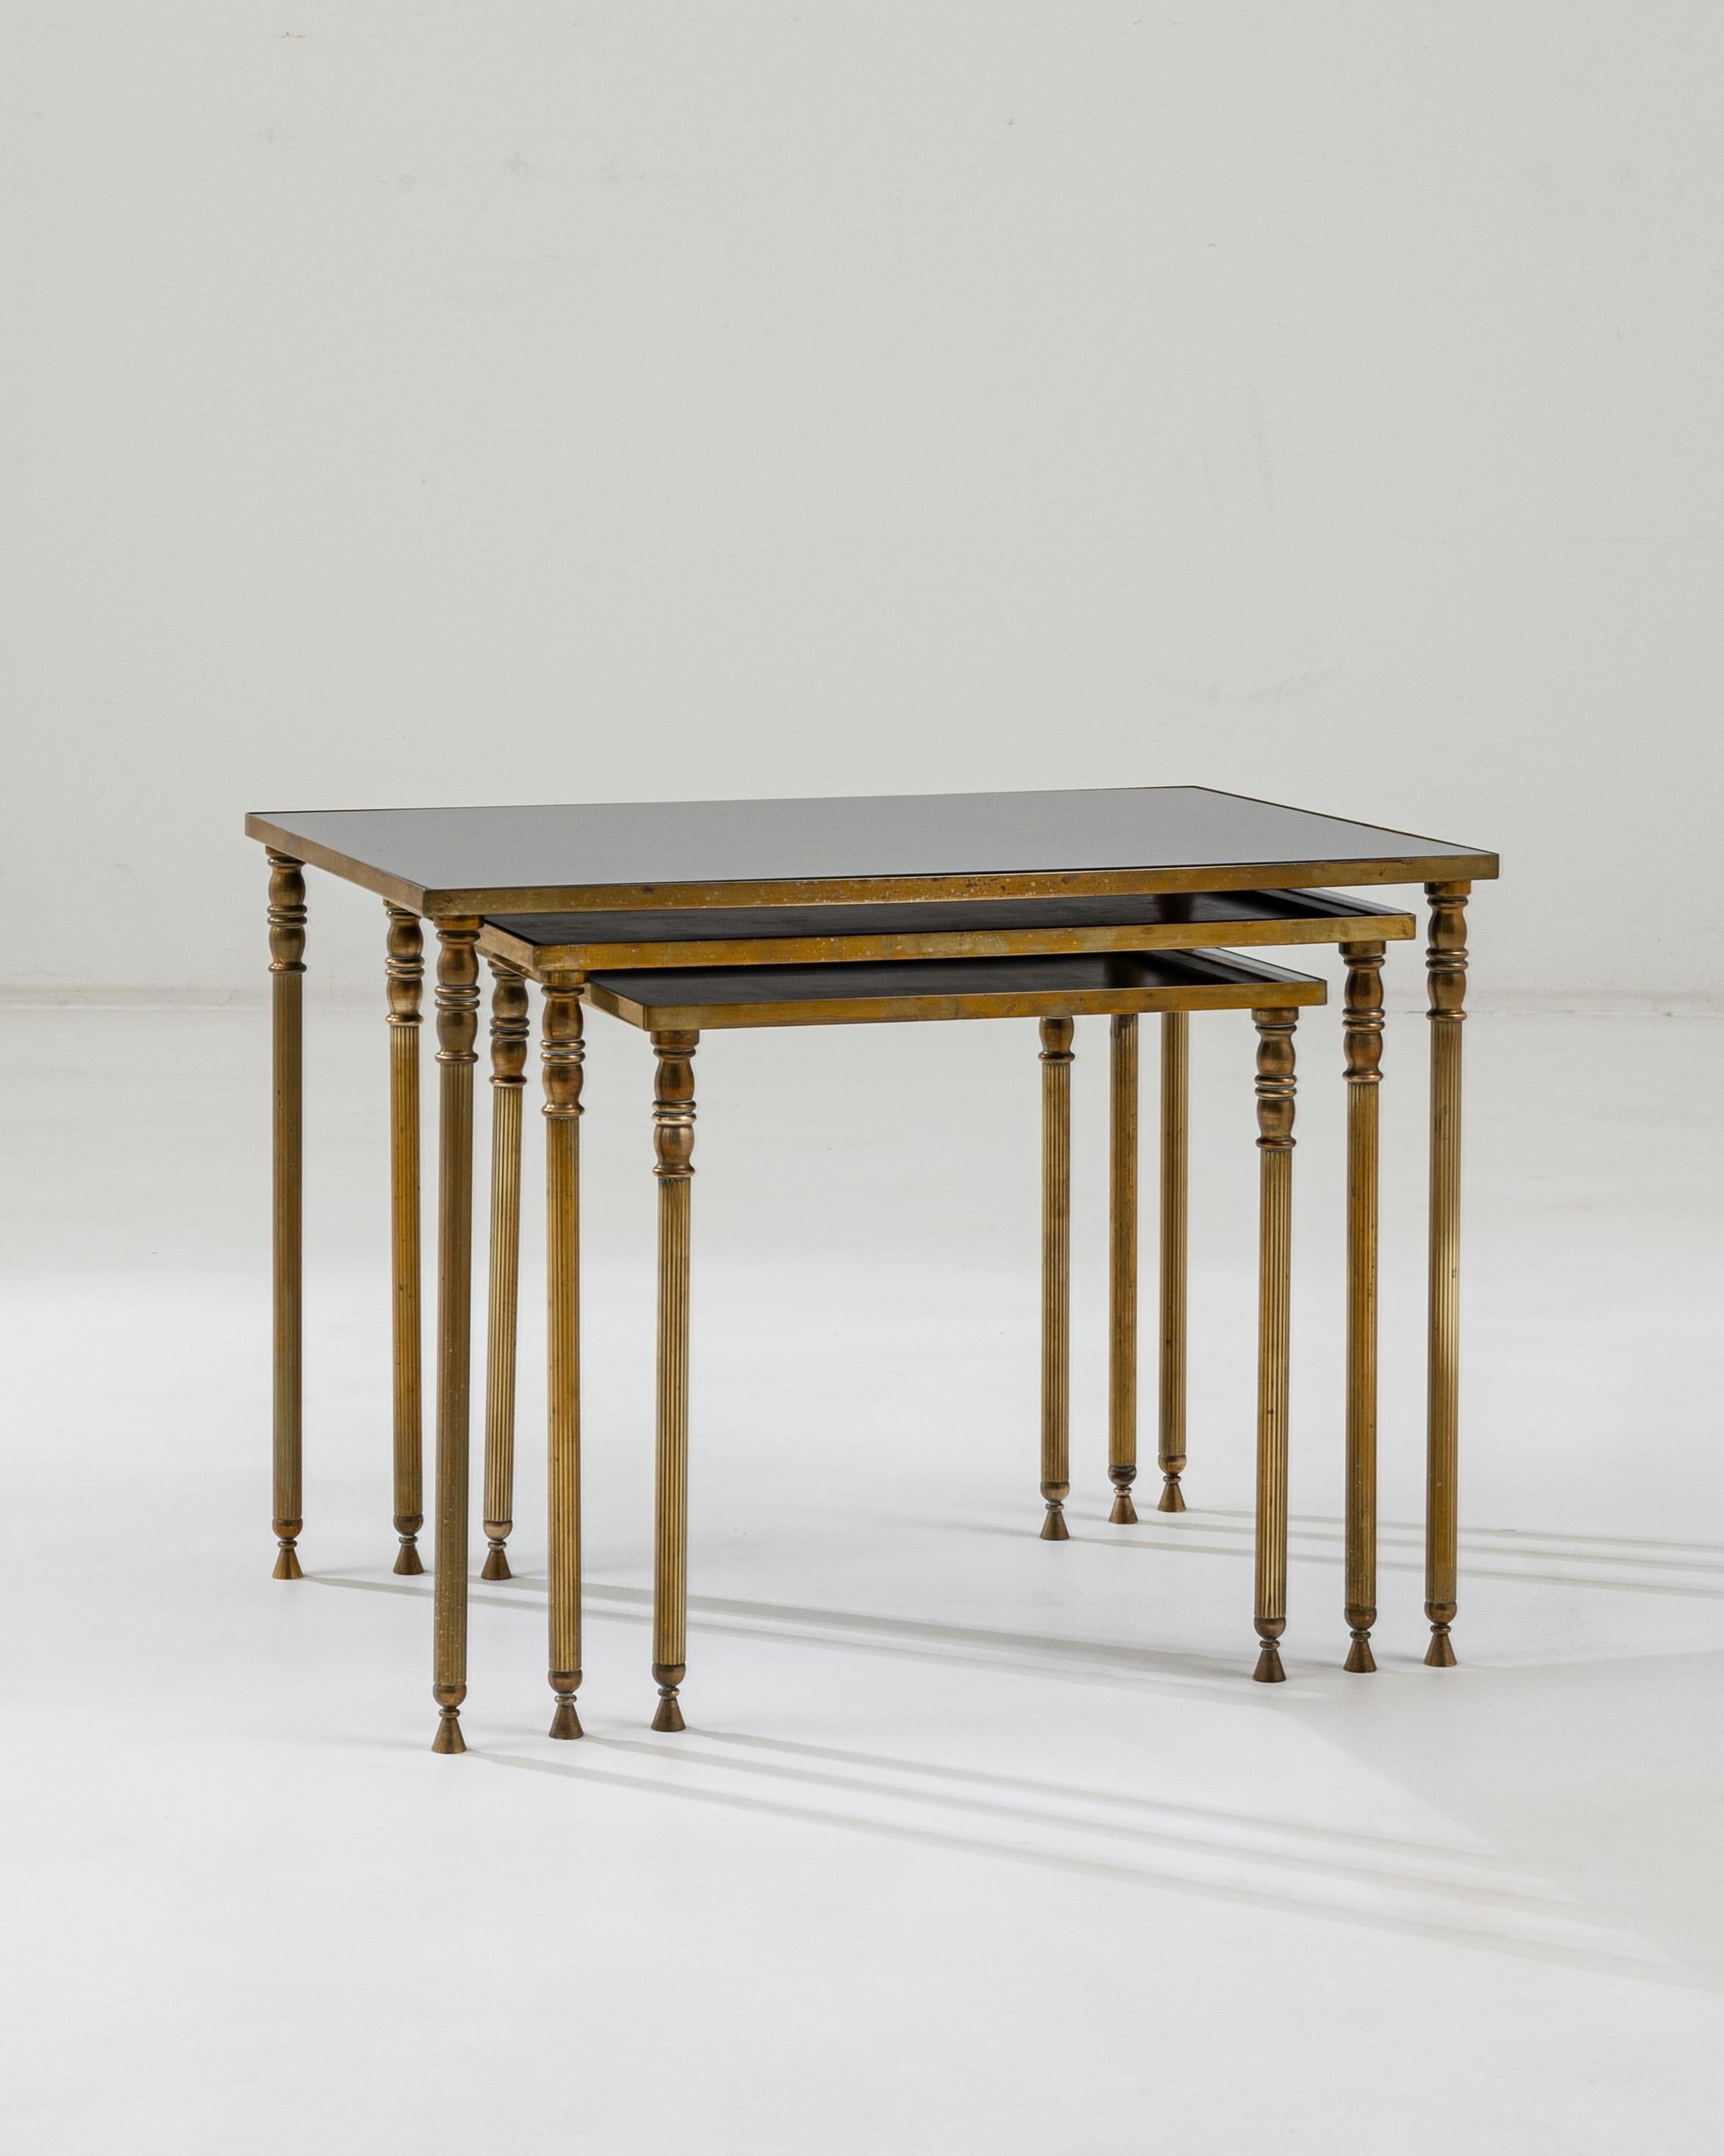 This trio of nesting tables provides a sophisticated accent. Made in France in the 1960s, a gilded brass base, gold-colored legs, and darkly tinted glass form a pleasing color palette. Fluted legs, crowned with golden urns, create a Neo-classical